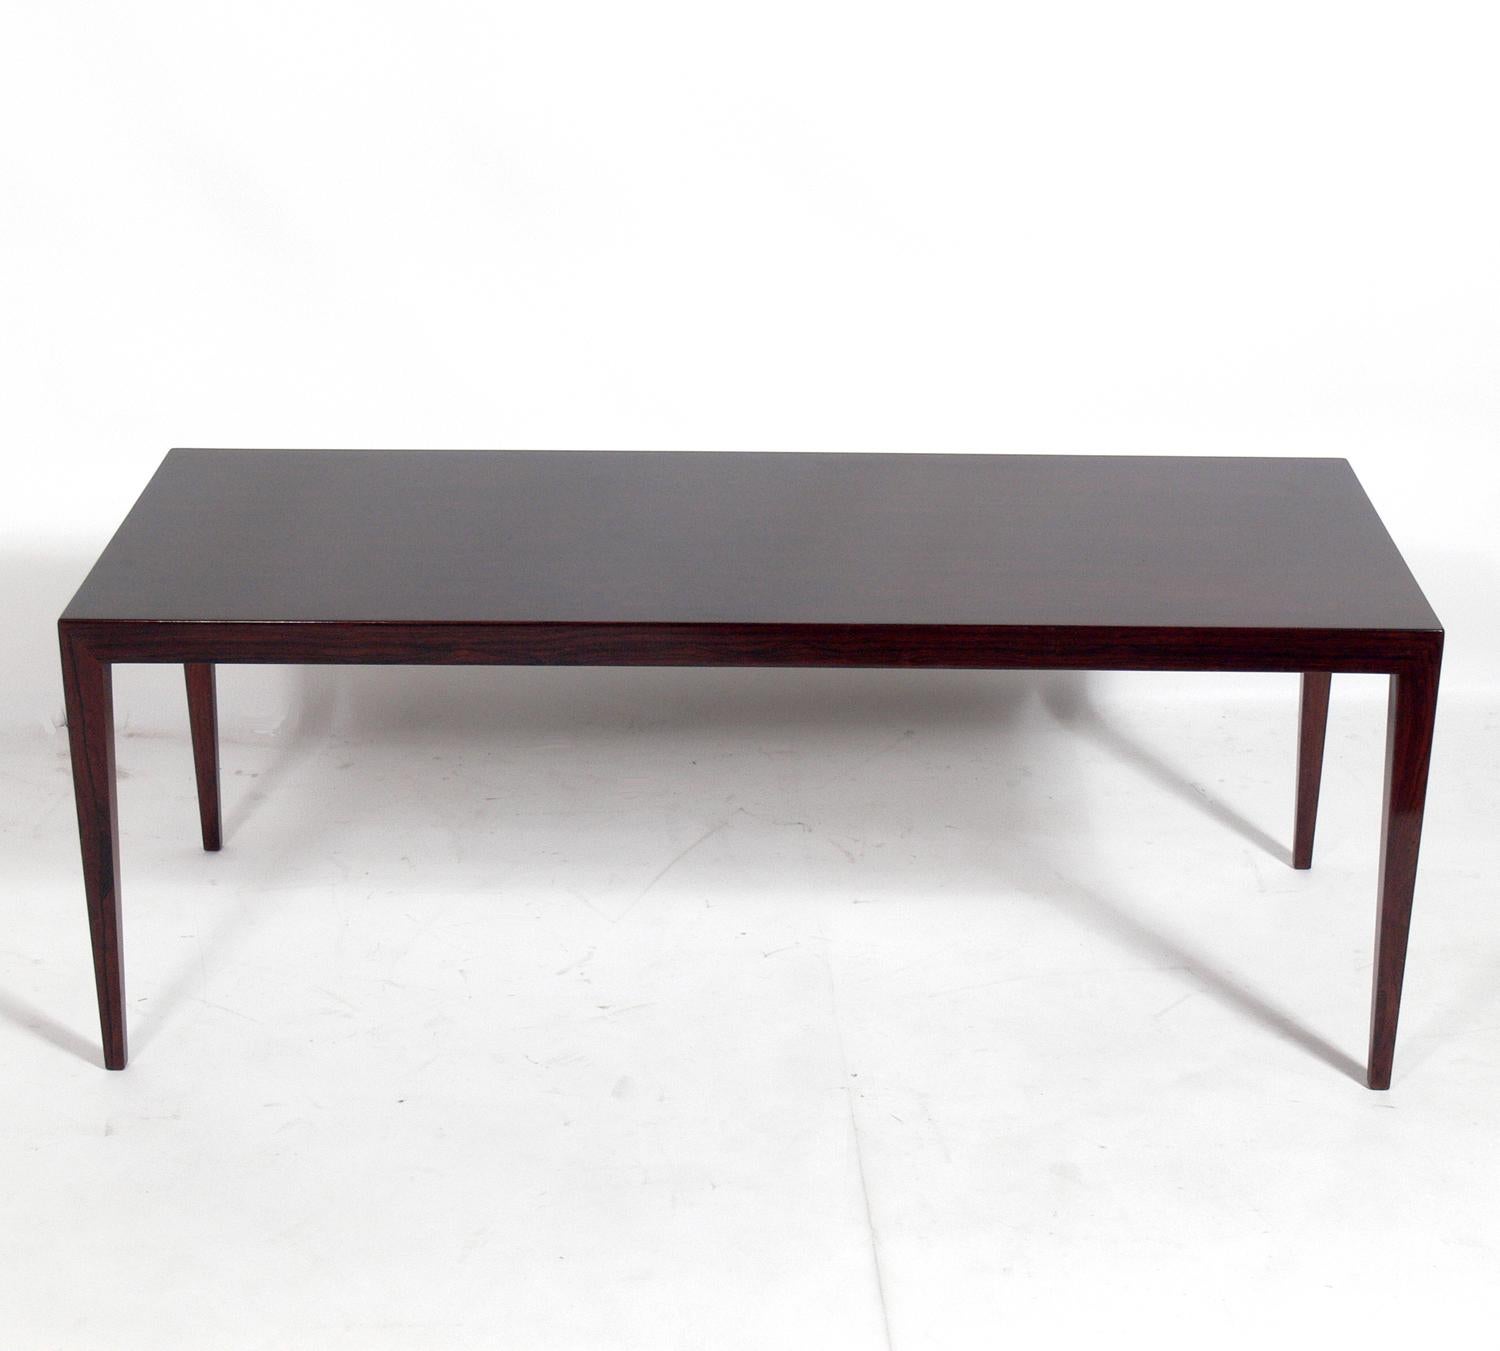 Clean lined Danish modern rosewood coffee table, designed by Severin Hansen Jr for Haslev Møbelsnedkeri A/S, Denmark, circa 1960s. Beautifully grained rosewood throughout.